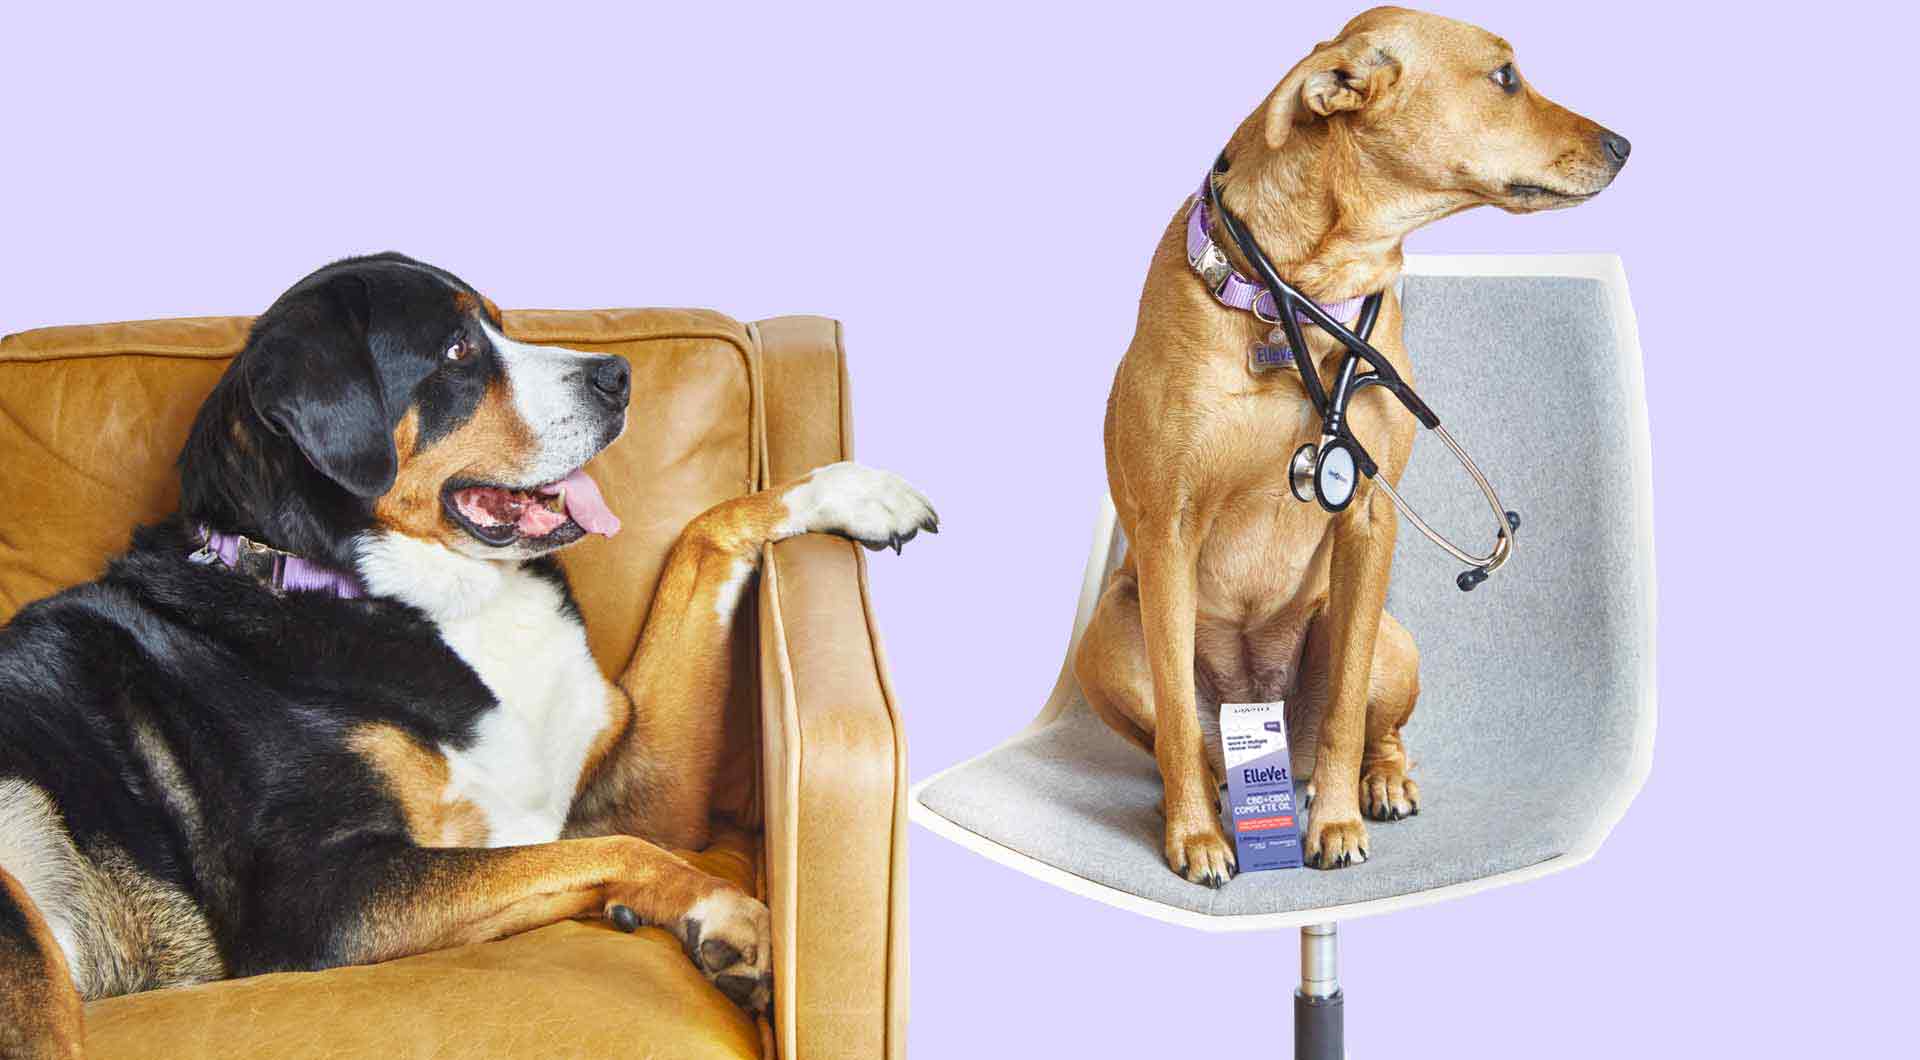 Large dog on couch, medium dog with stethoscope on chair with ElleVet Oil box